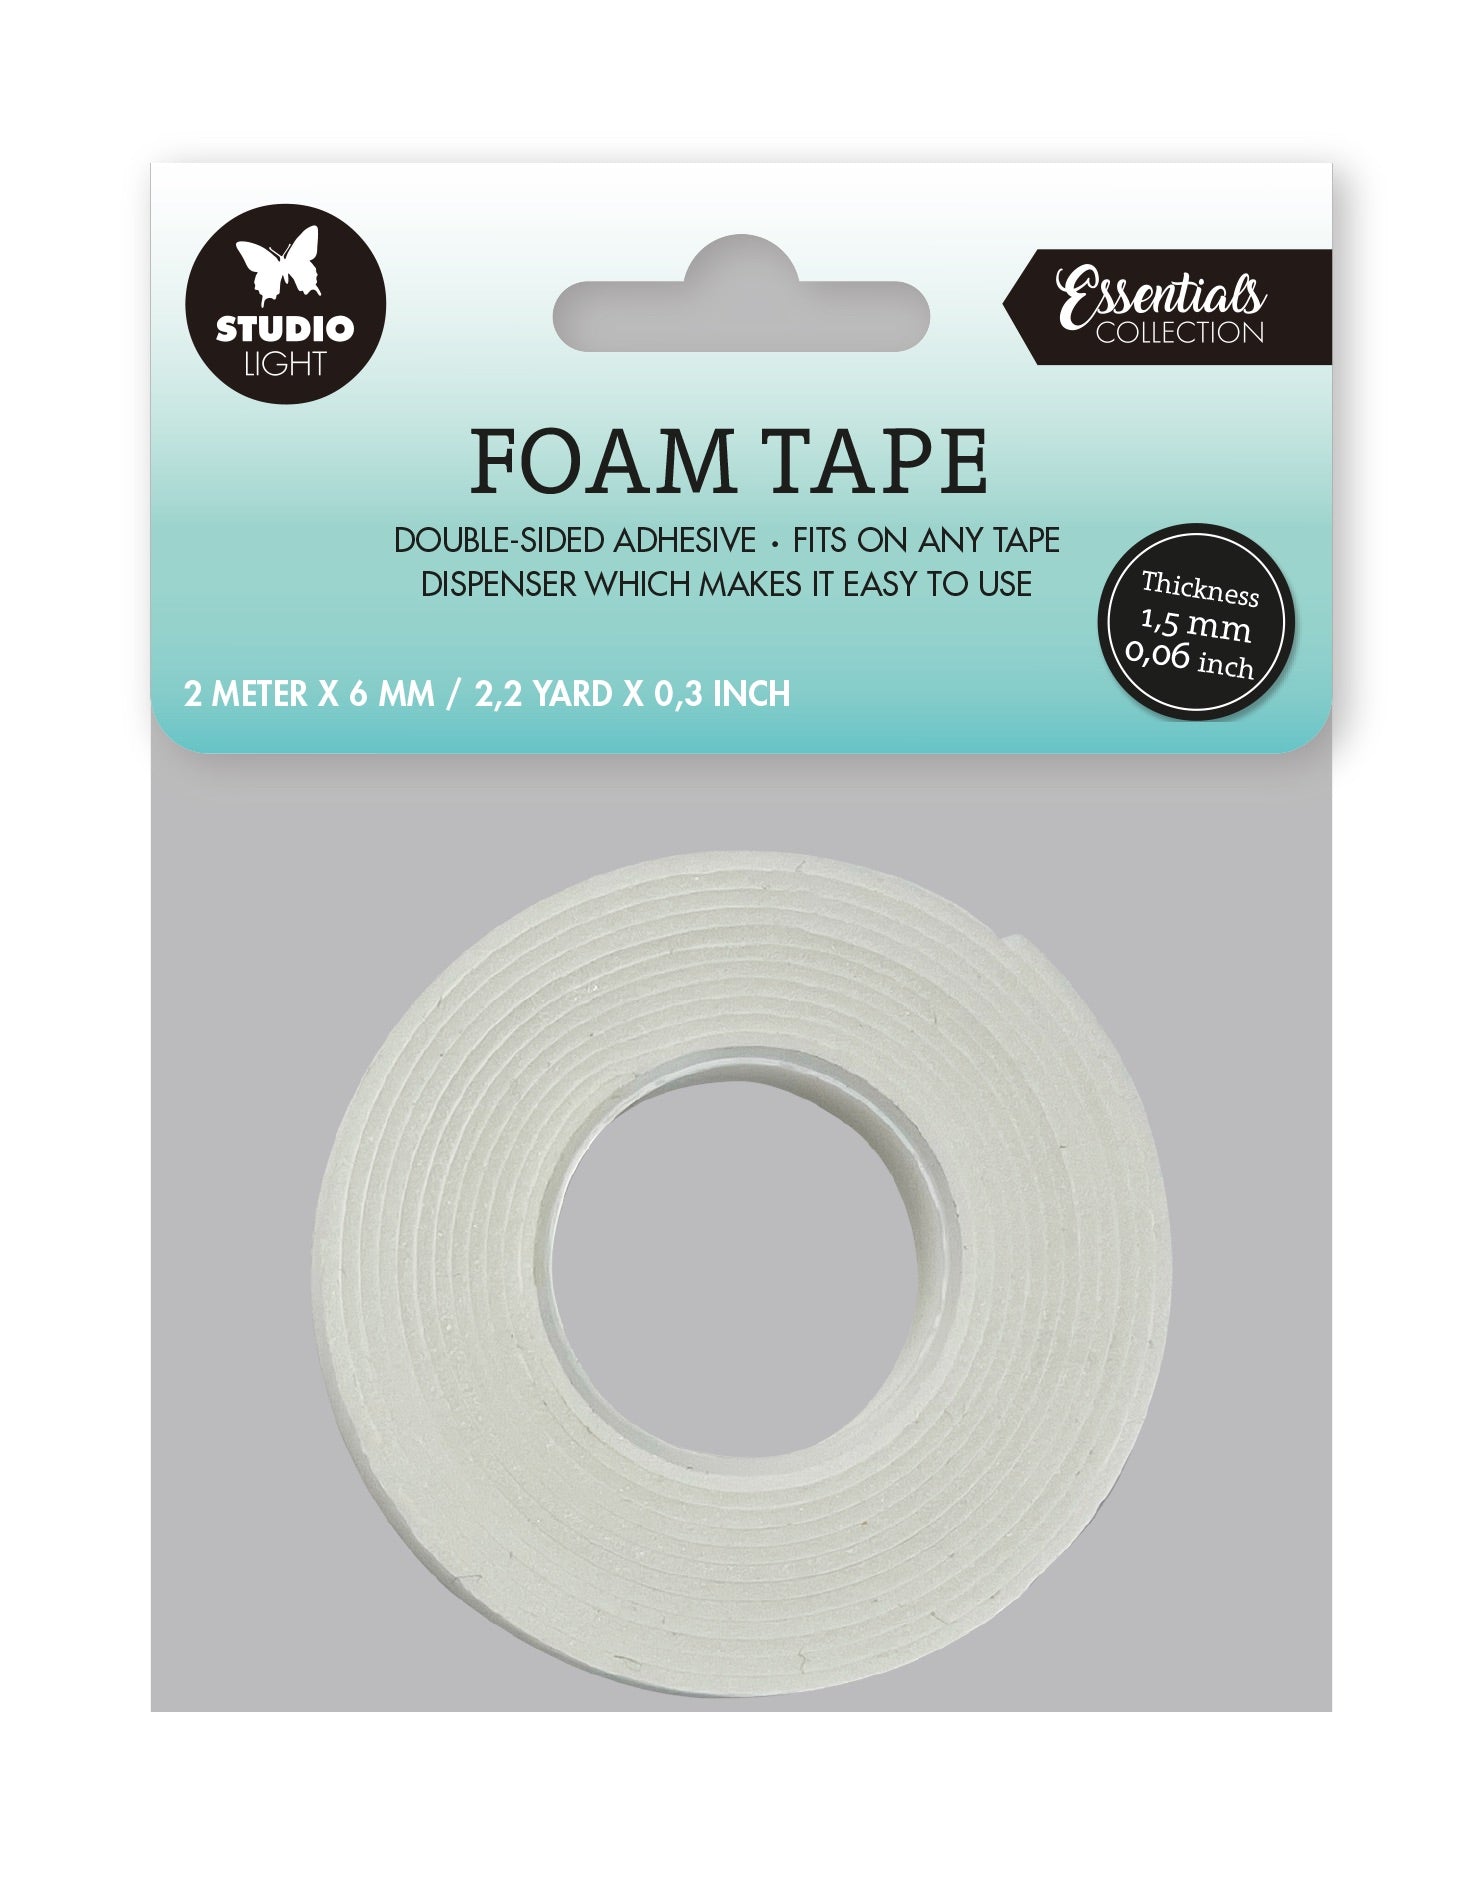 SL Doublesided Foam Tape 1.5mm Thick - 0.6mm Wide Essential Tools 71x71x0.6mm 2 MT nr.03